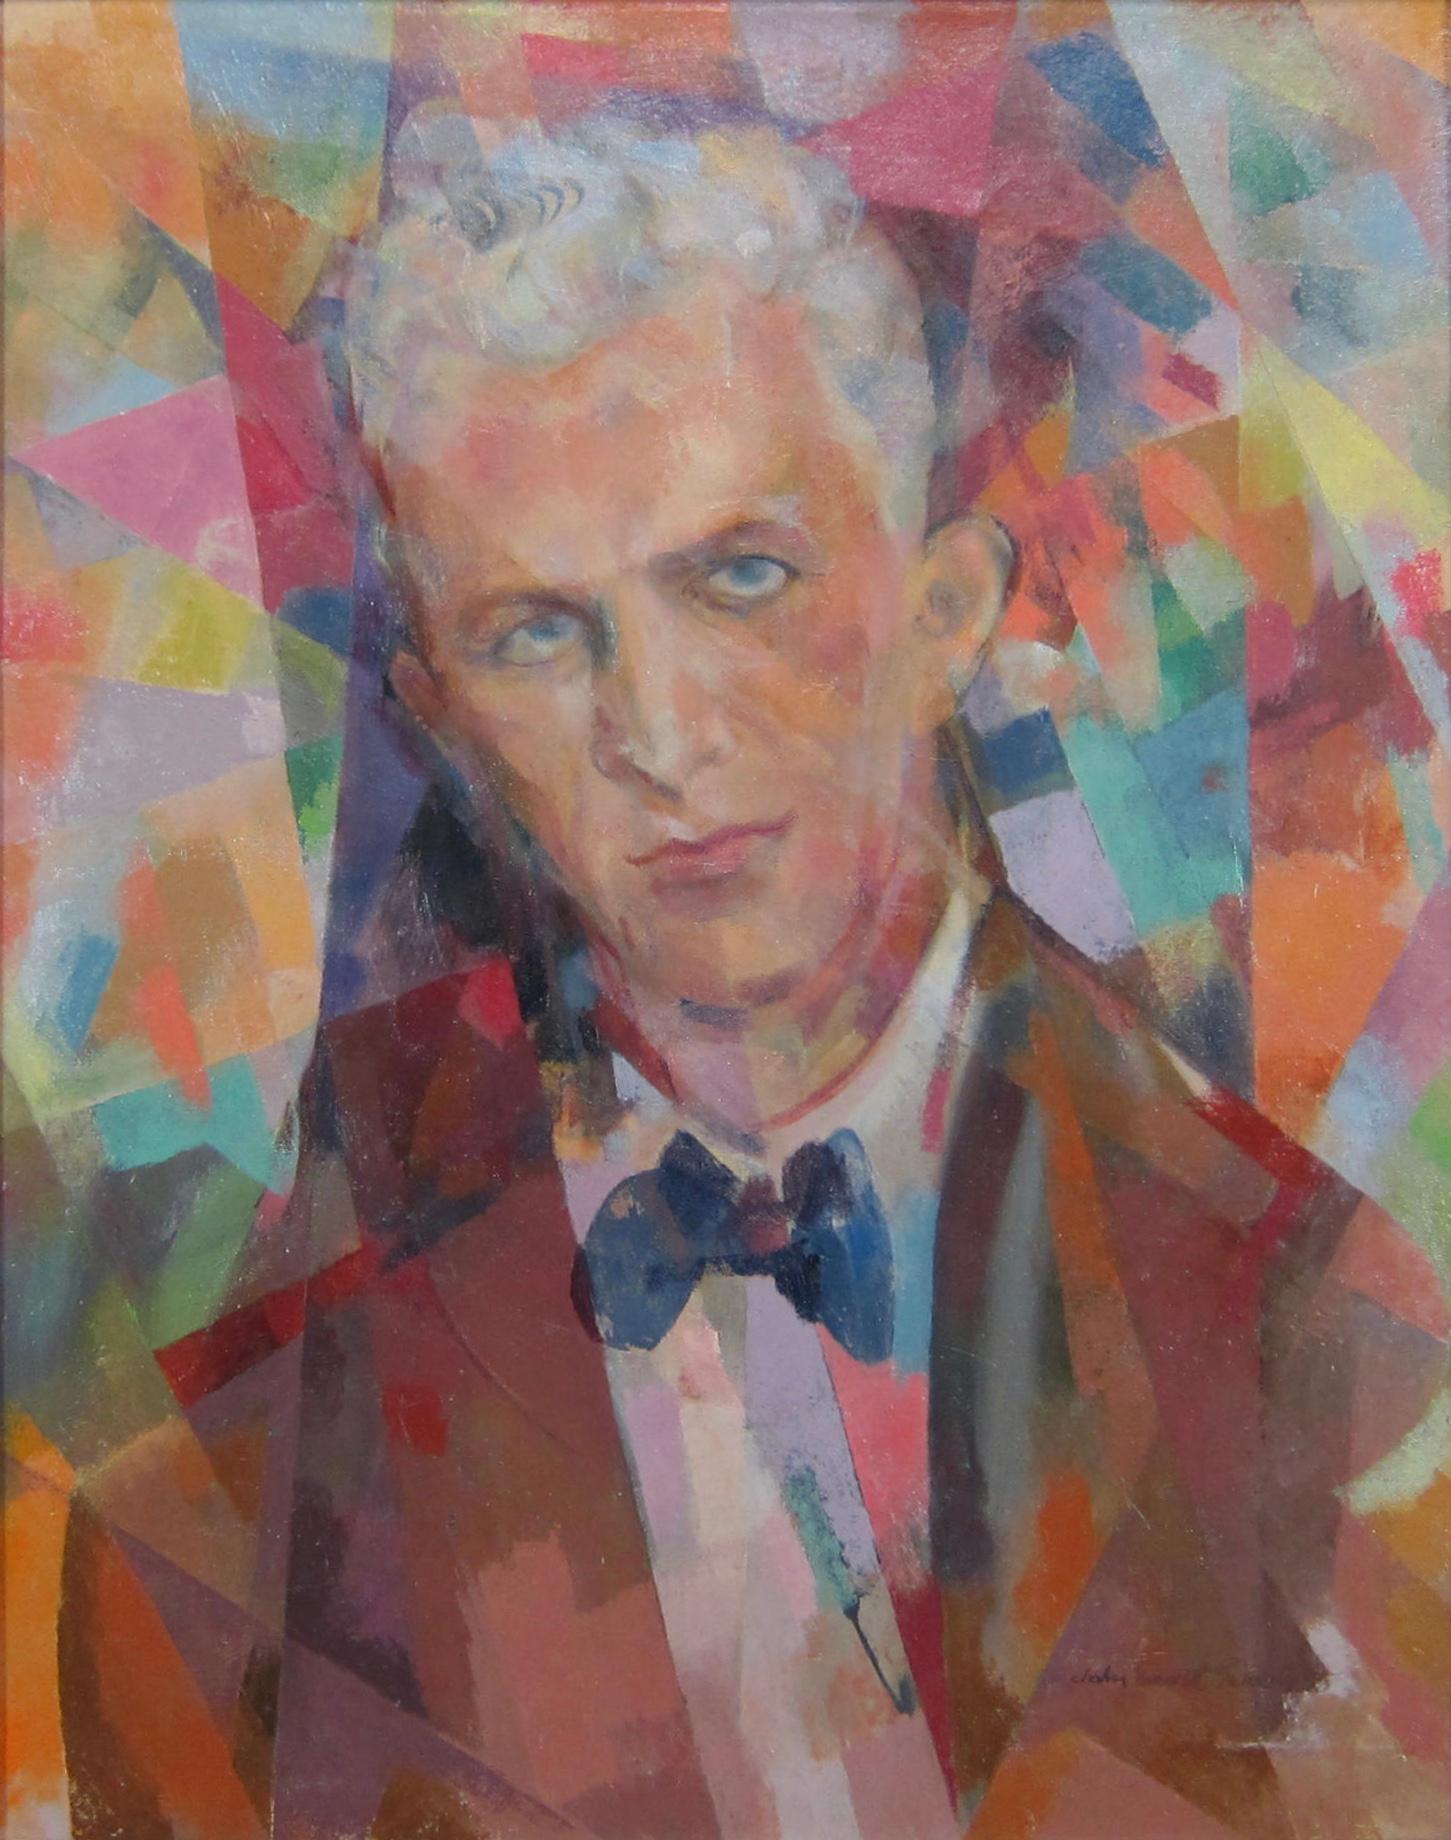 Synchromist oil painting portrait of a man by California artist John Emmett Gerrity. 
About the artist: John Emmett Gerrity, (American 1895-1980), was born in Los Altos, California in 1895. In 1919 he began studying art on his own before studying at